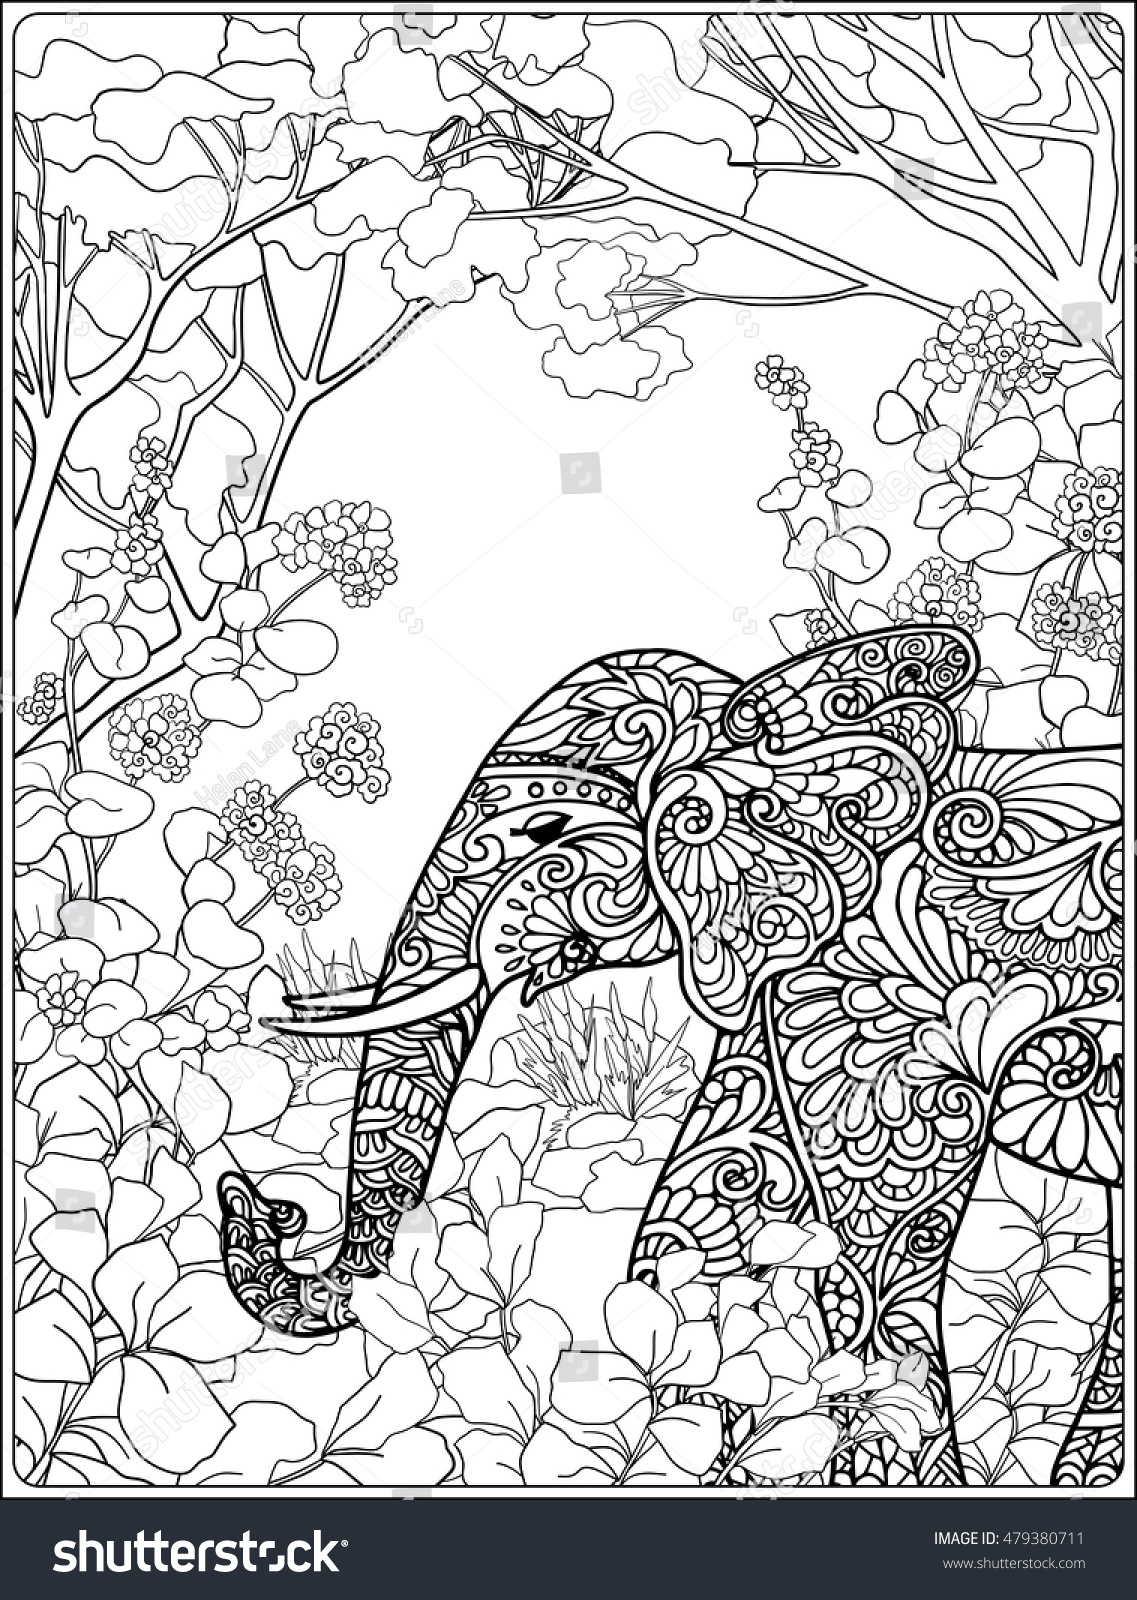 Coloring Page Elephant Forest Coloring Book Stock Vector (Royalty Free ...